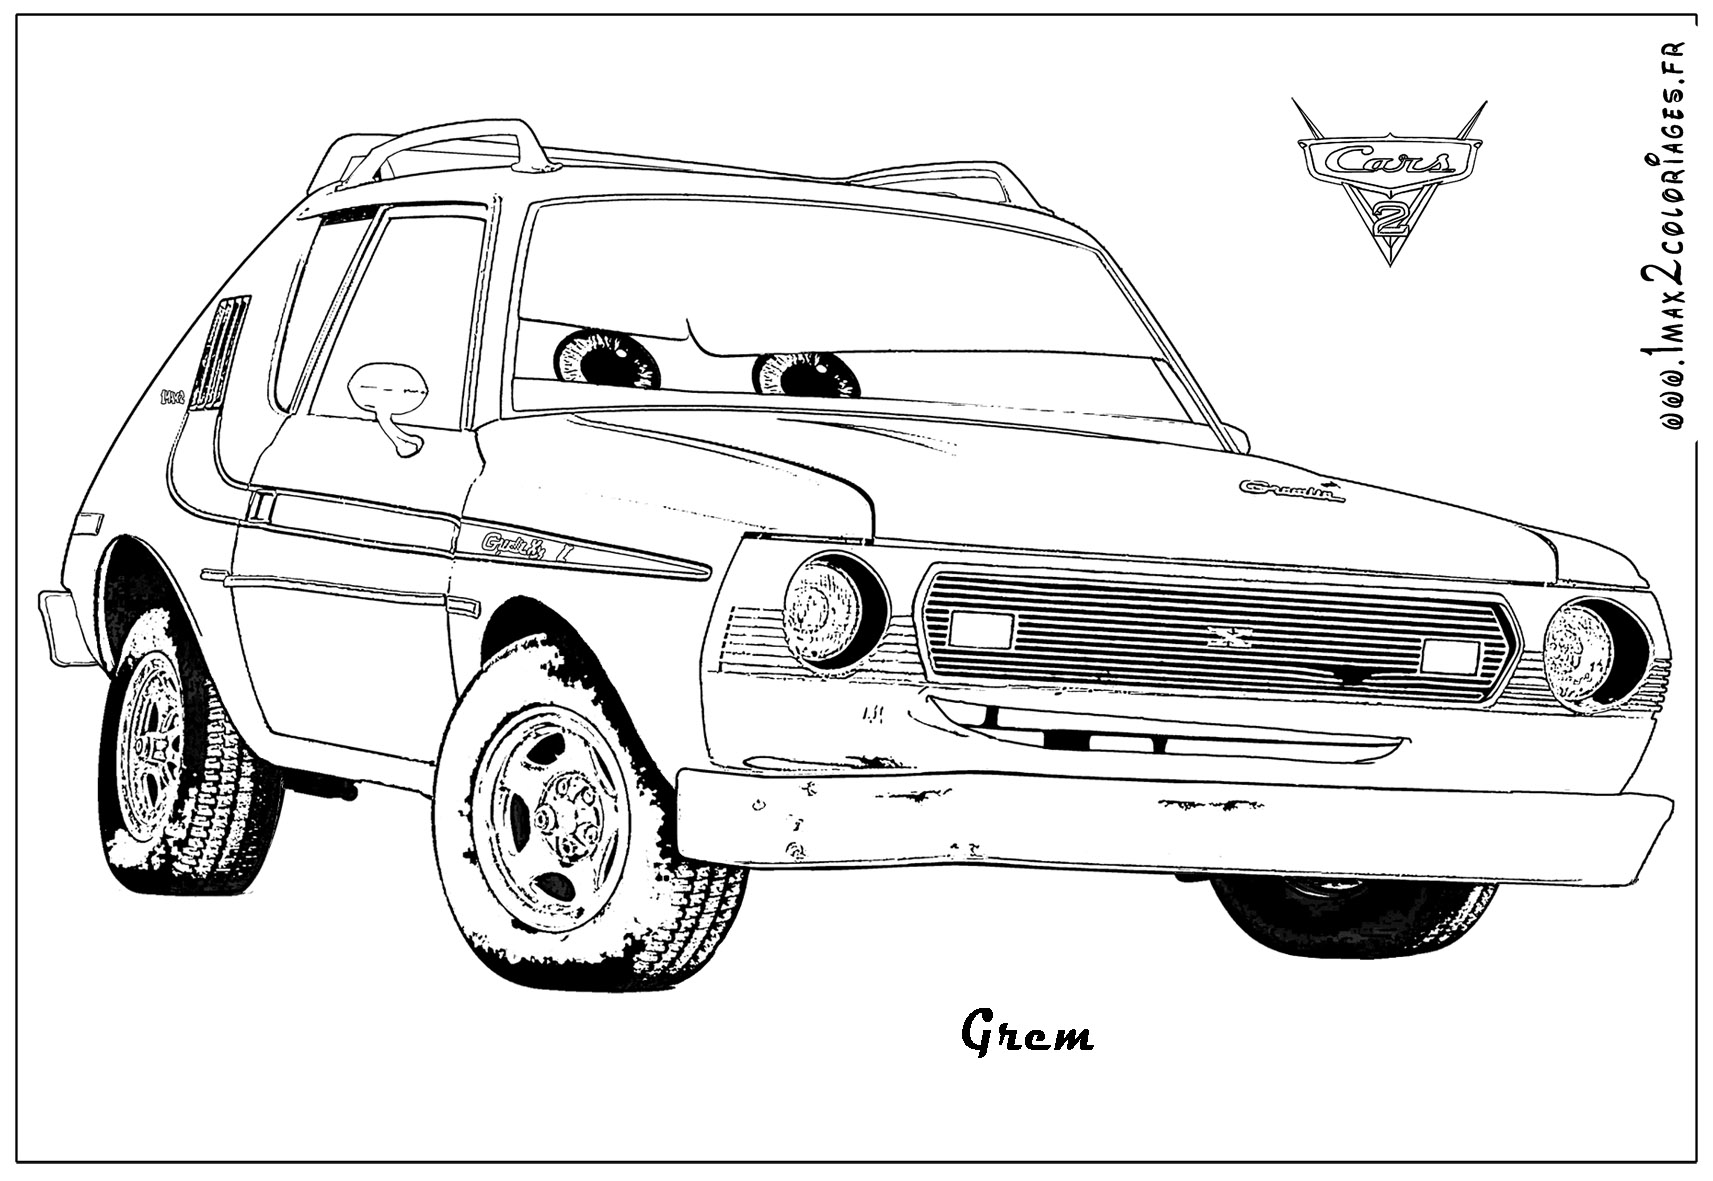 cars-2-coloring-pages-to-download-cars-2-kids-coloring-pages